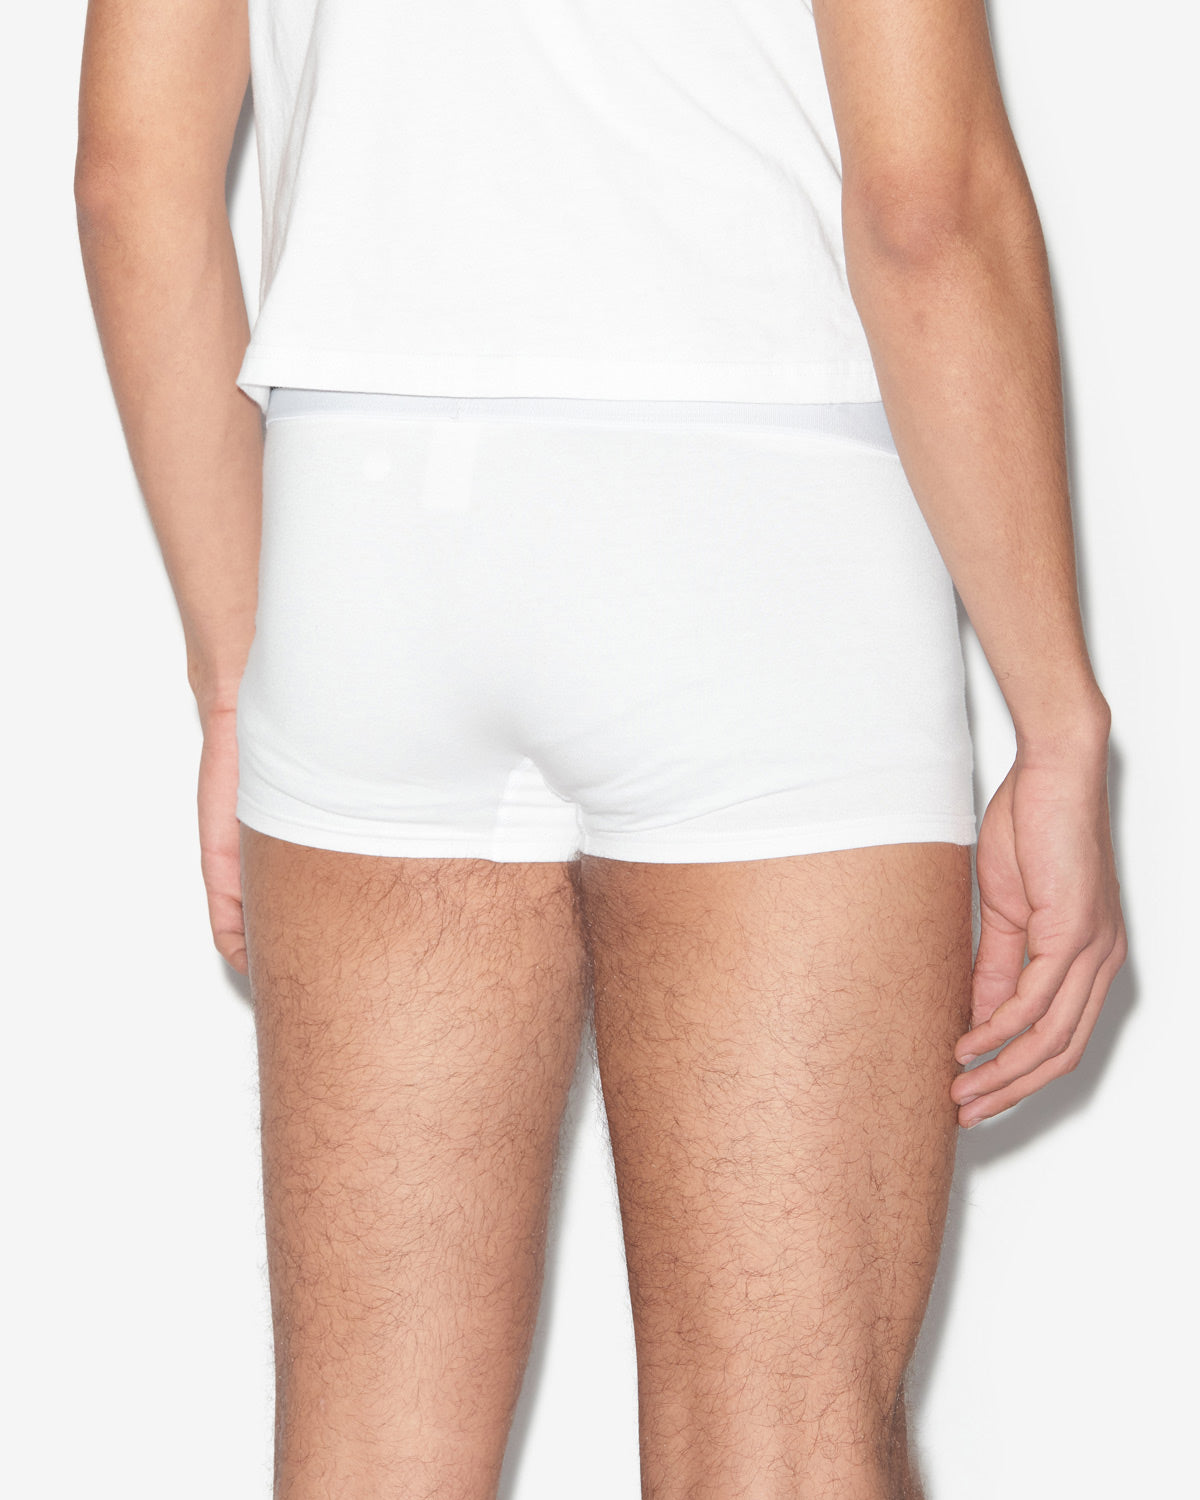 Billy knickers Man White 2